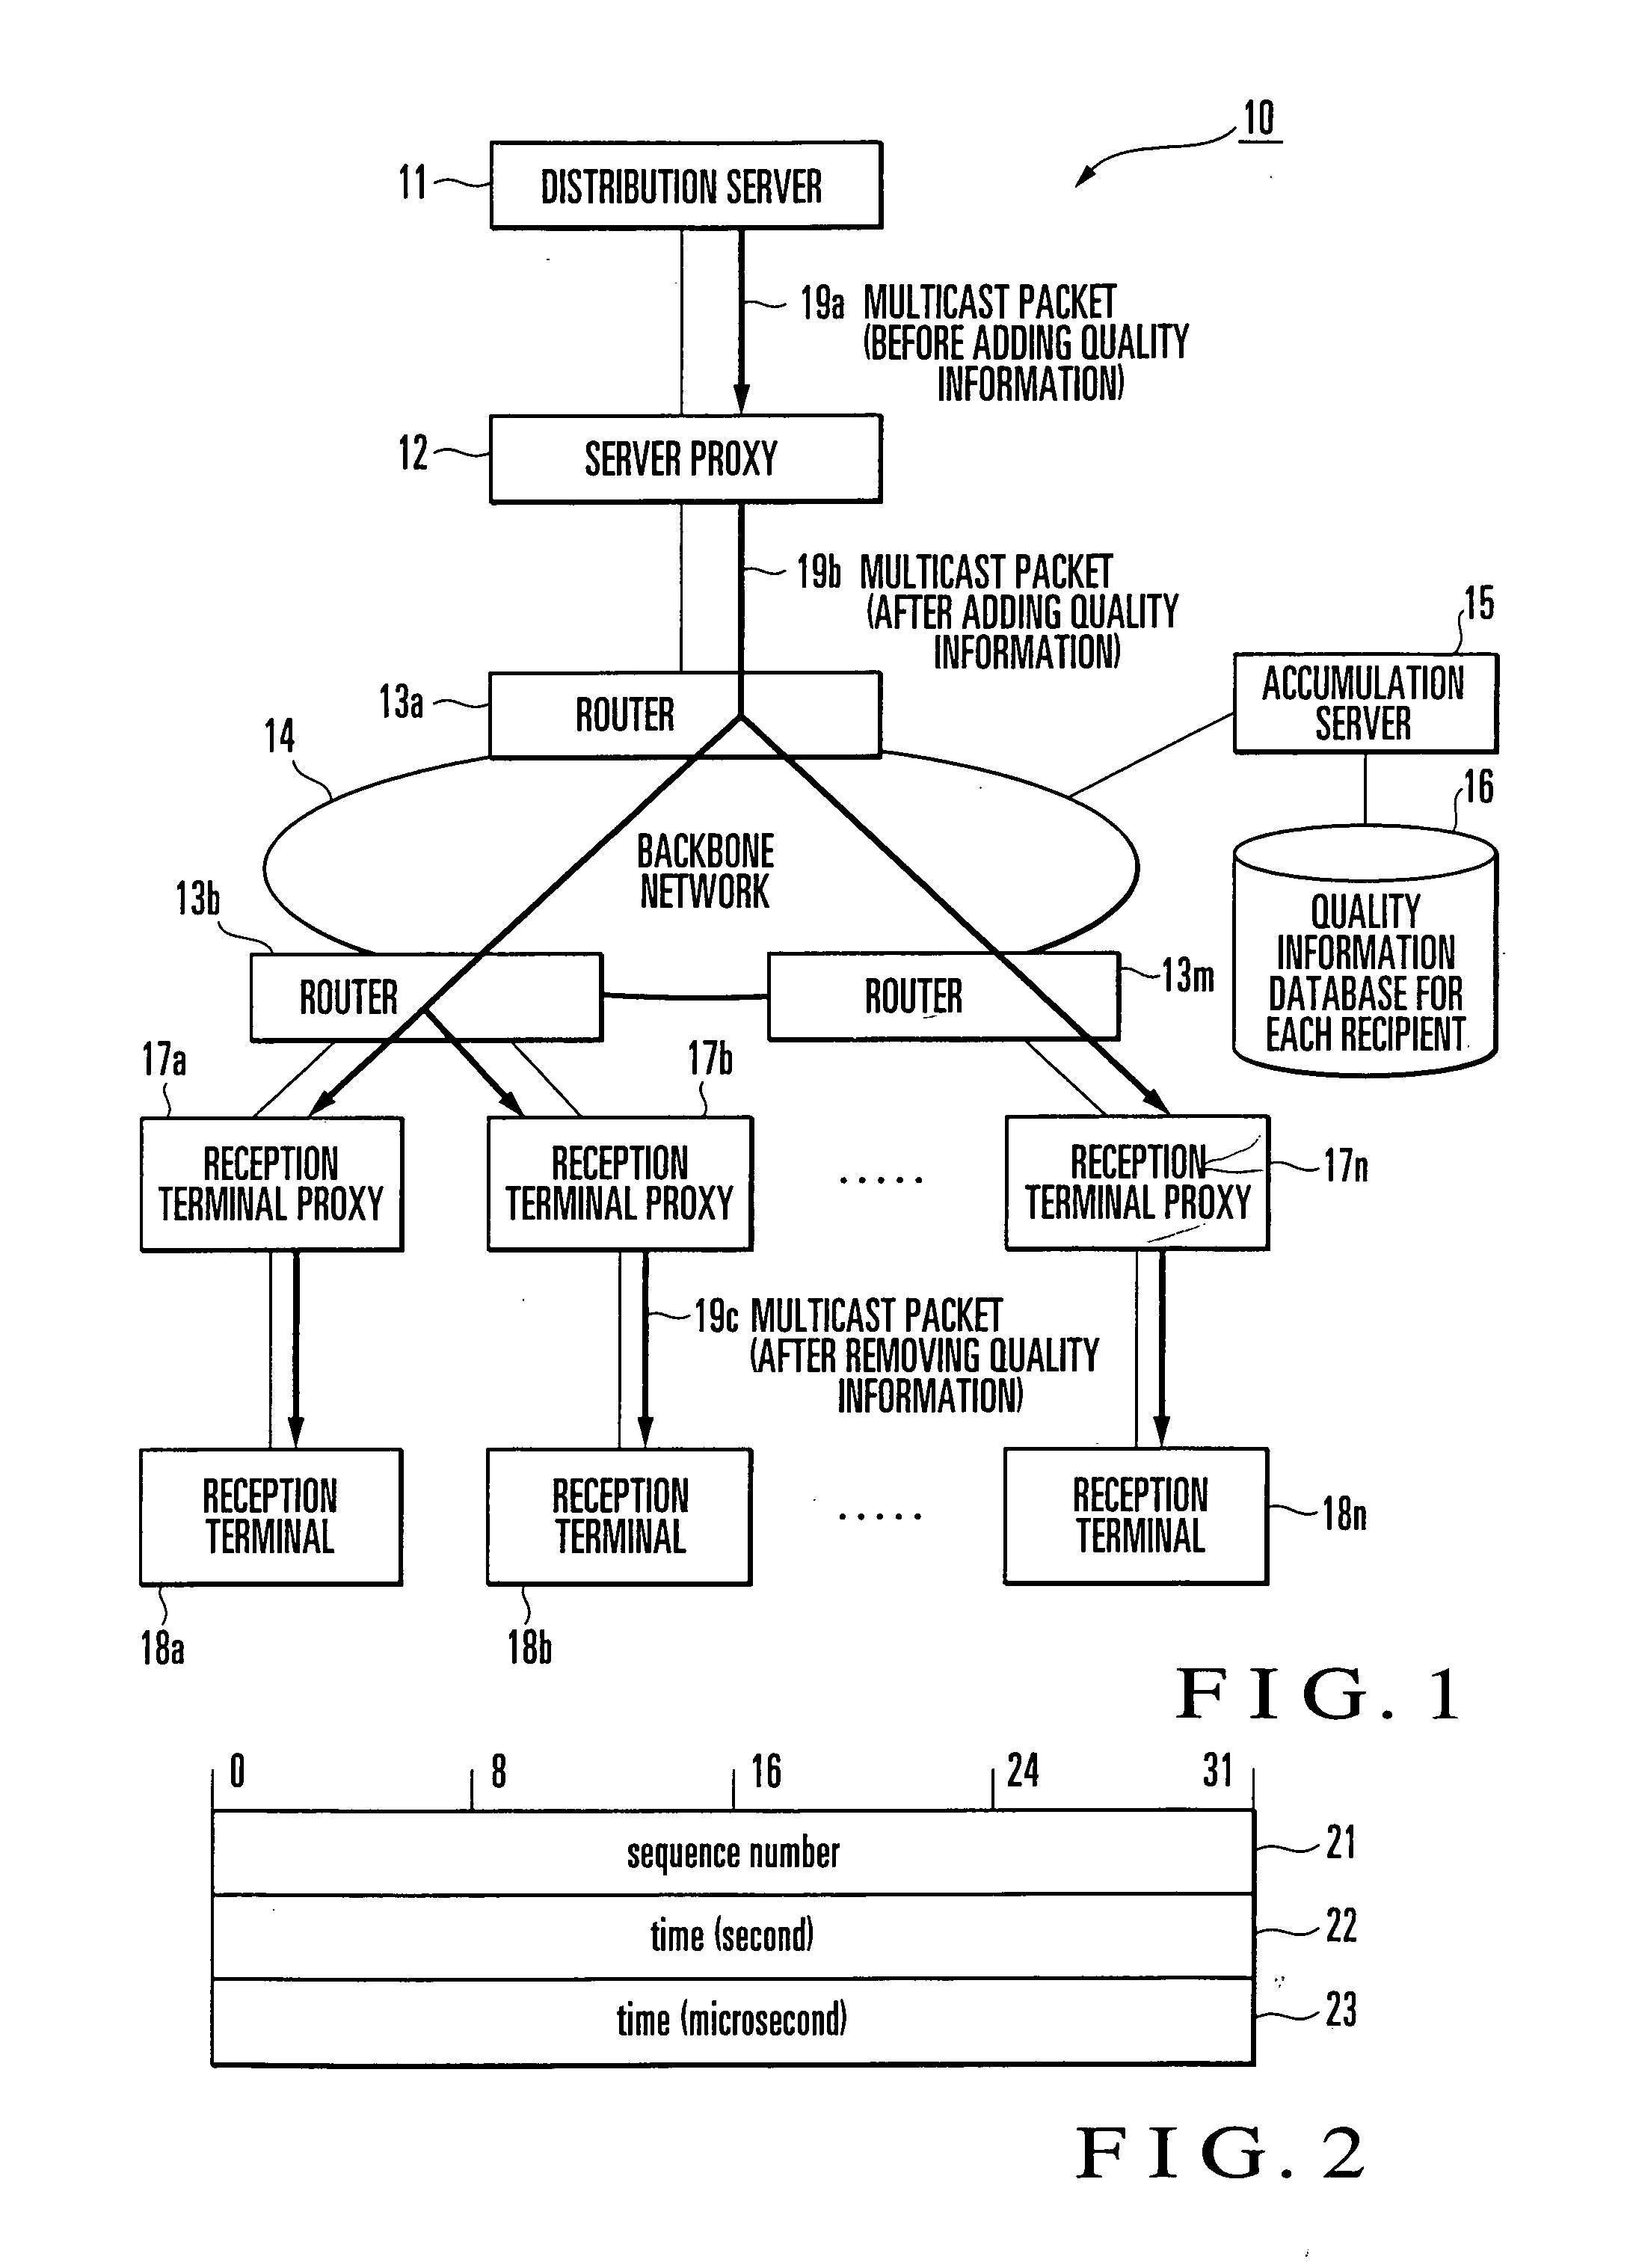 Communication quality management and apparatus